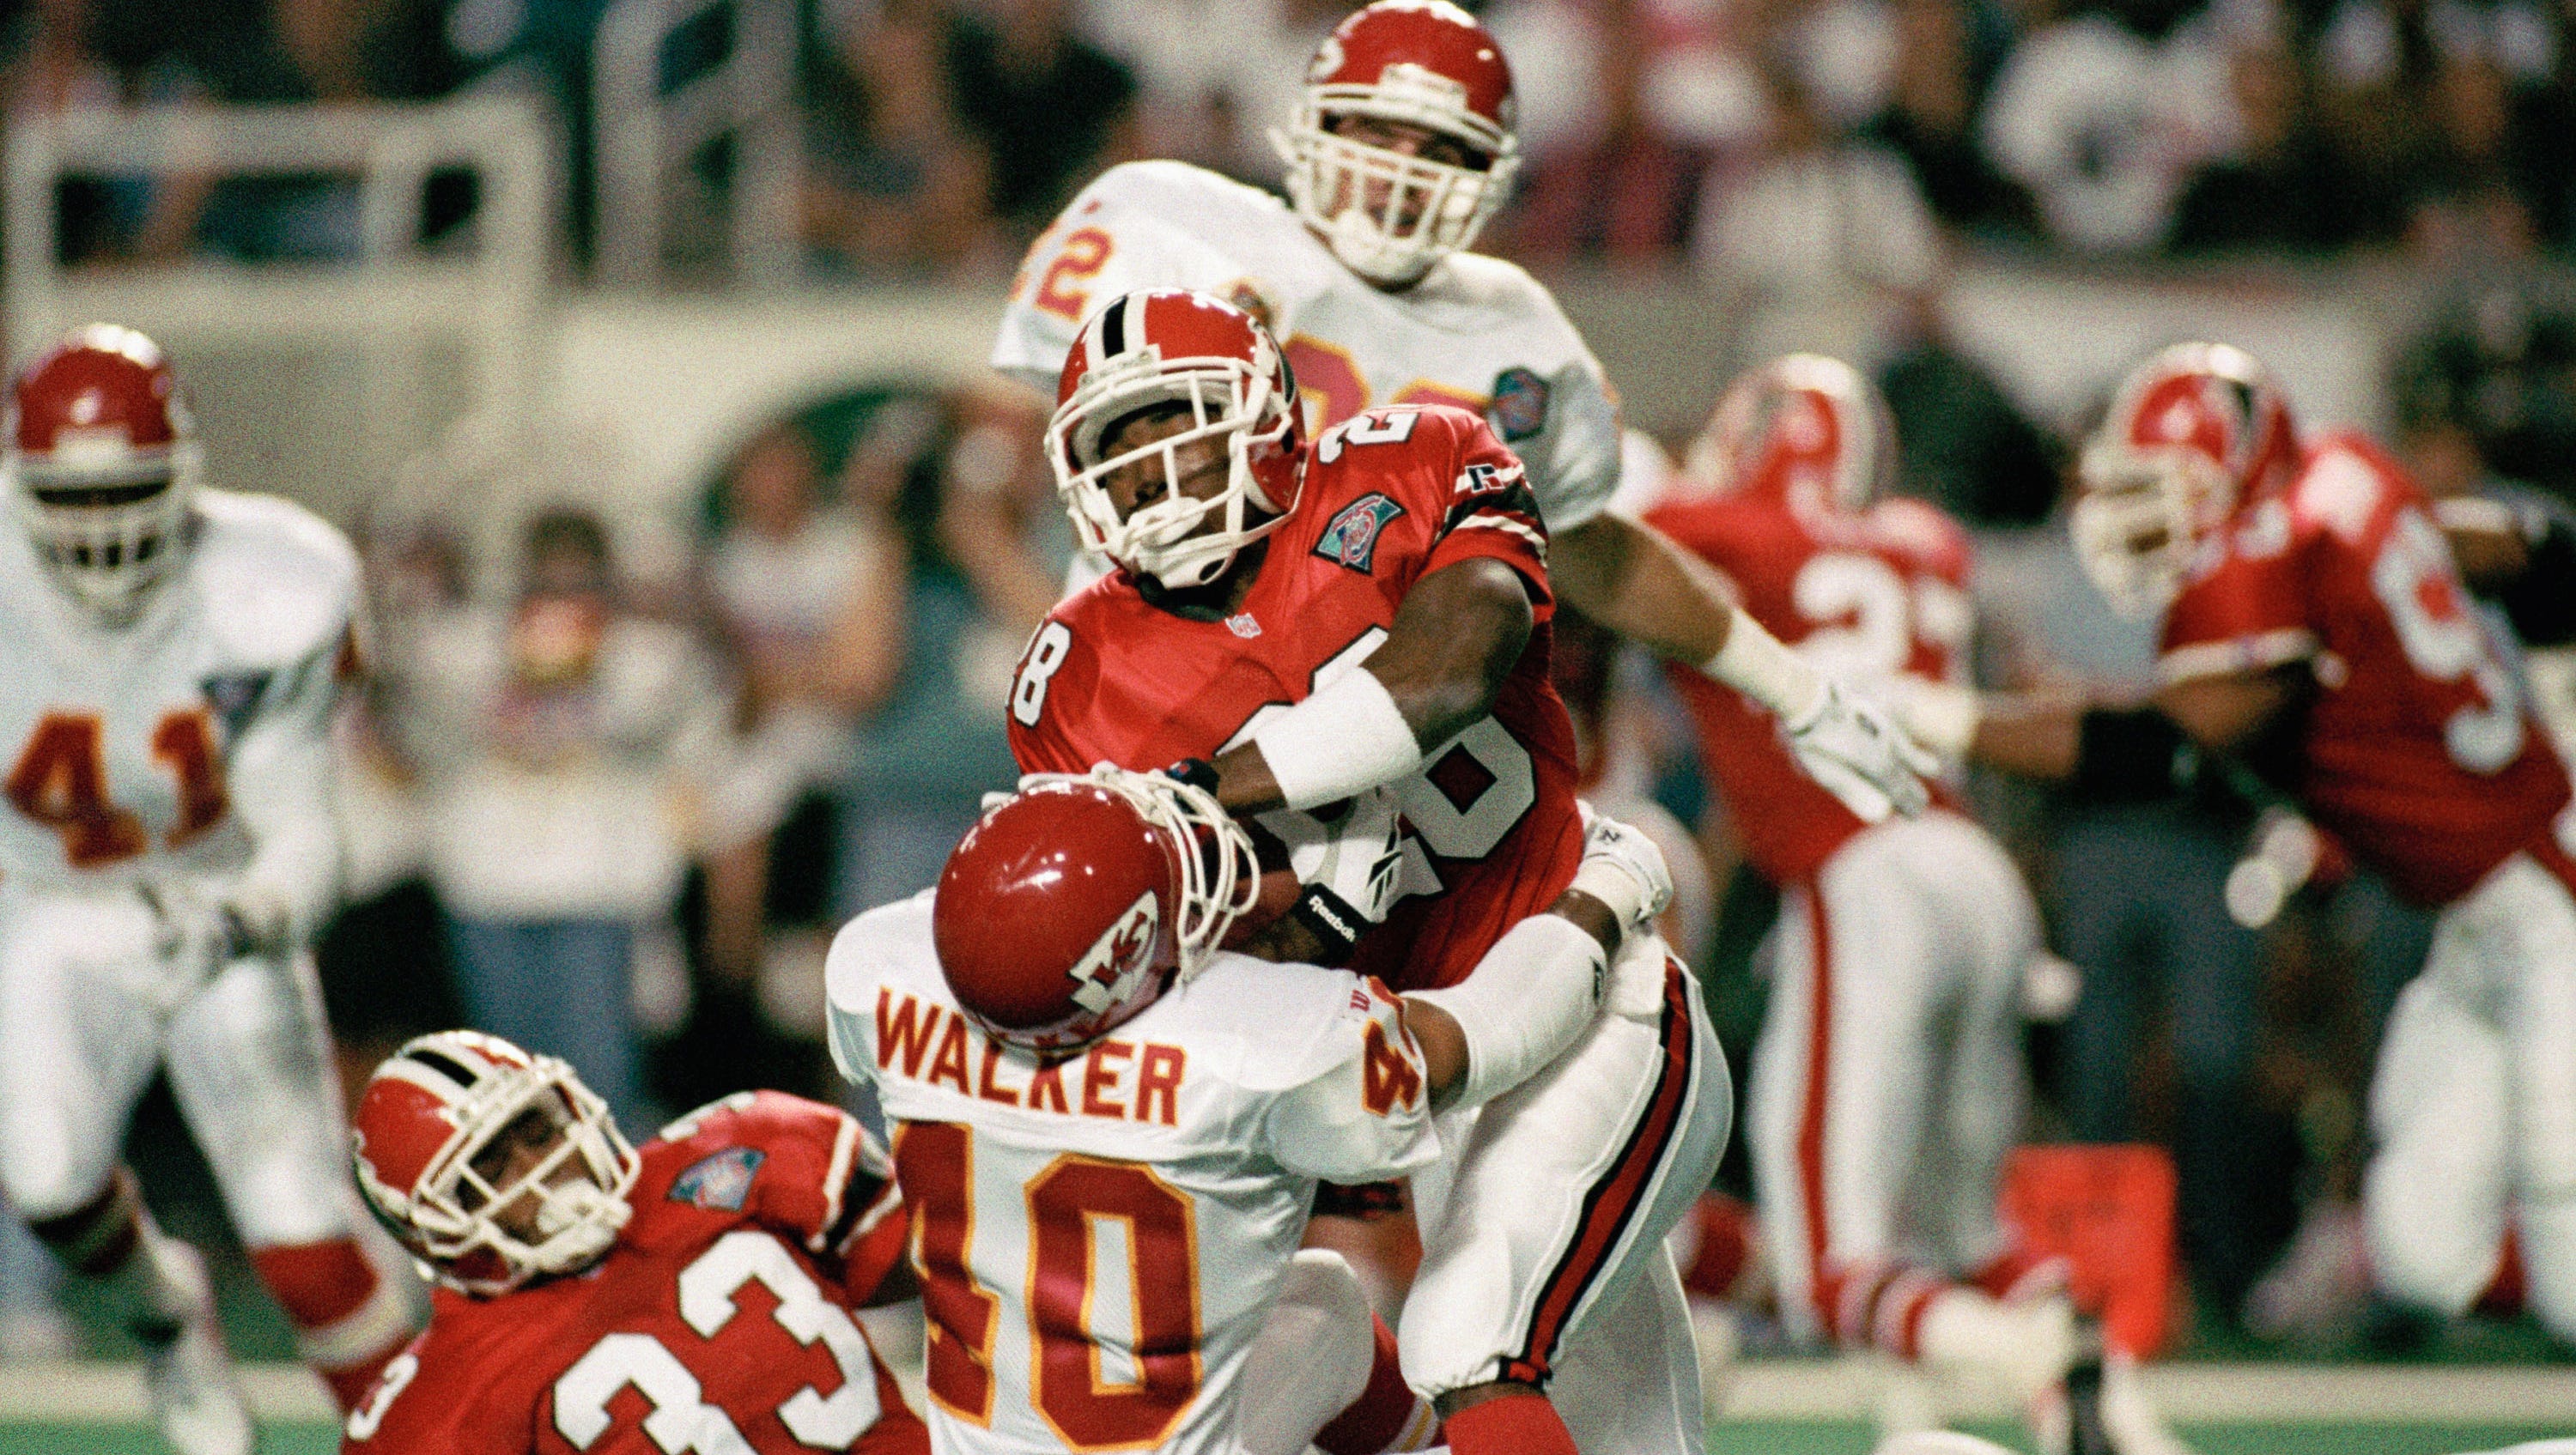 Atlanta Falcons running back Tony Smith (28) stiff arms Kansas City Chiefs safety Bracey Walker (40) as he fights for yardage on Sept. 18, 1994 in Atlanta